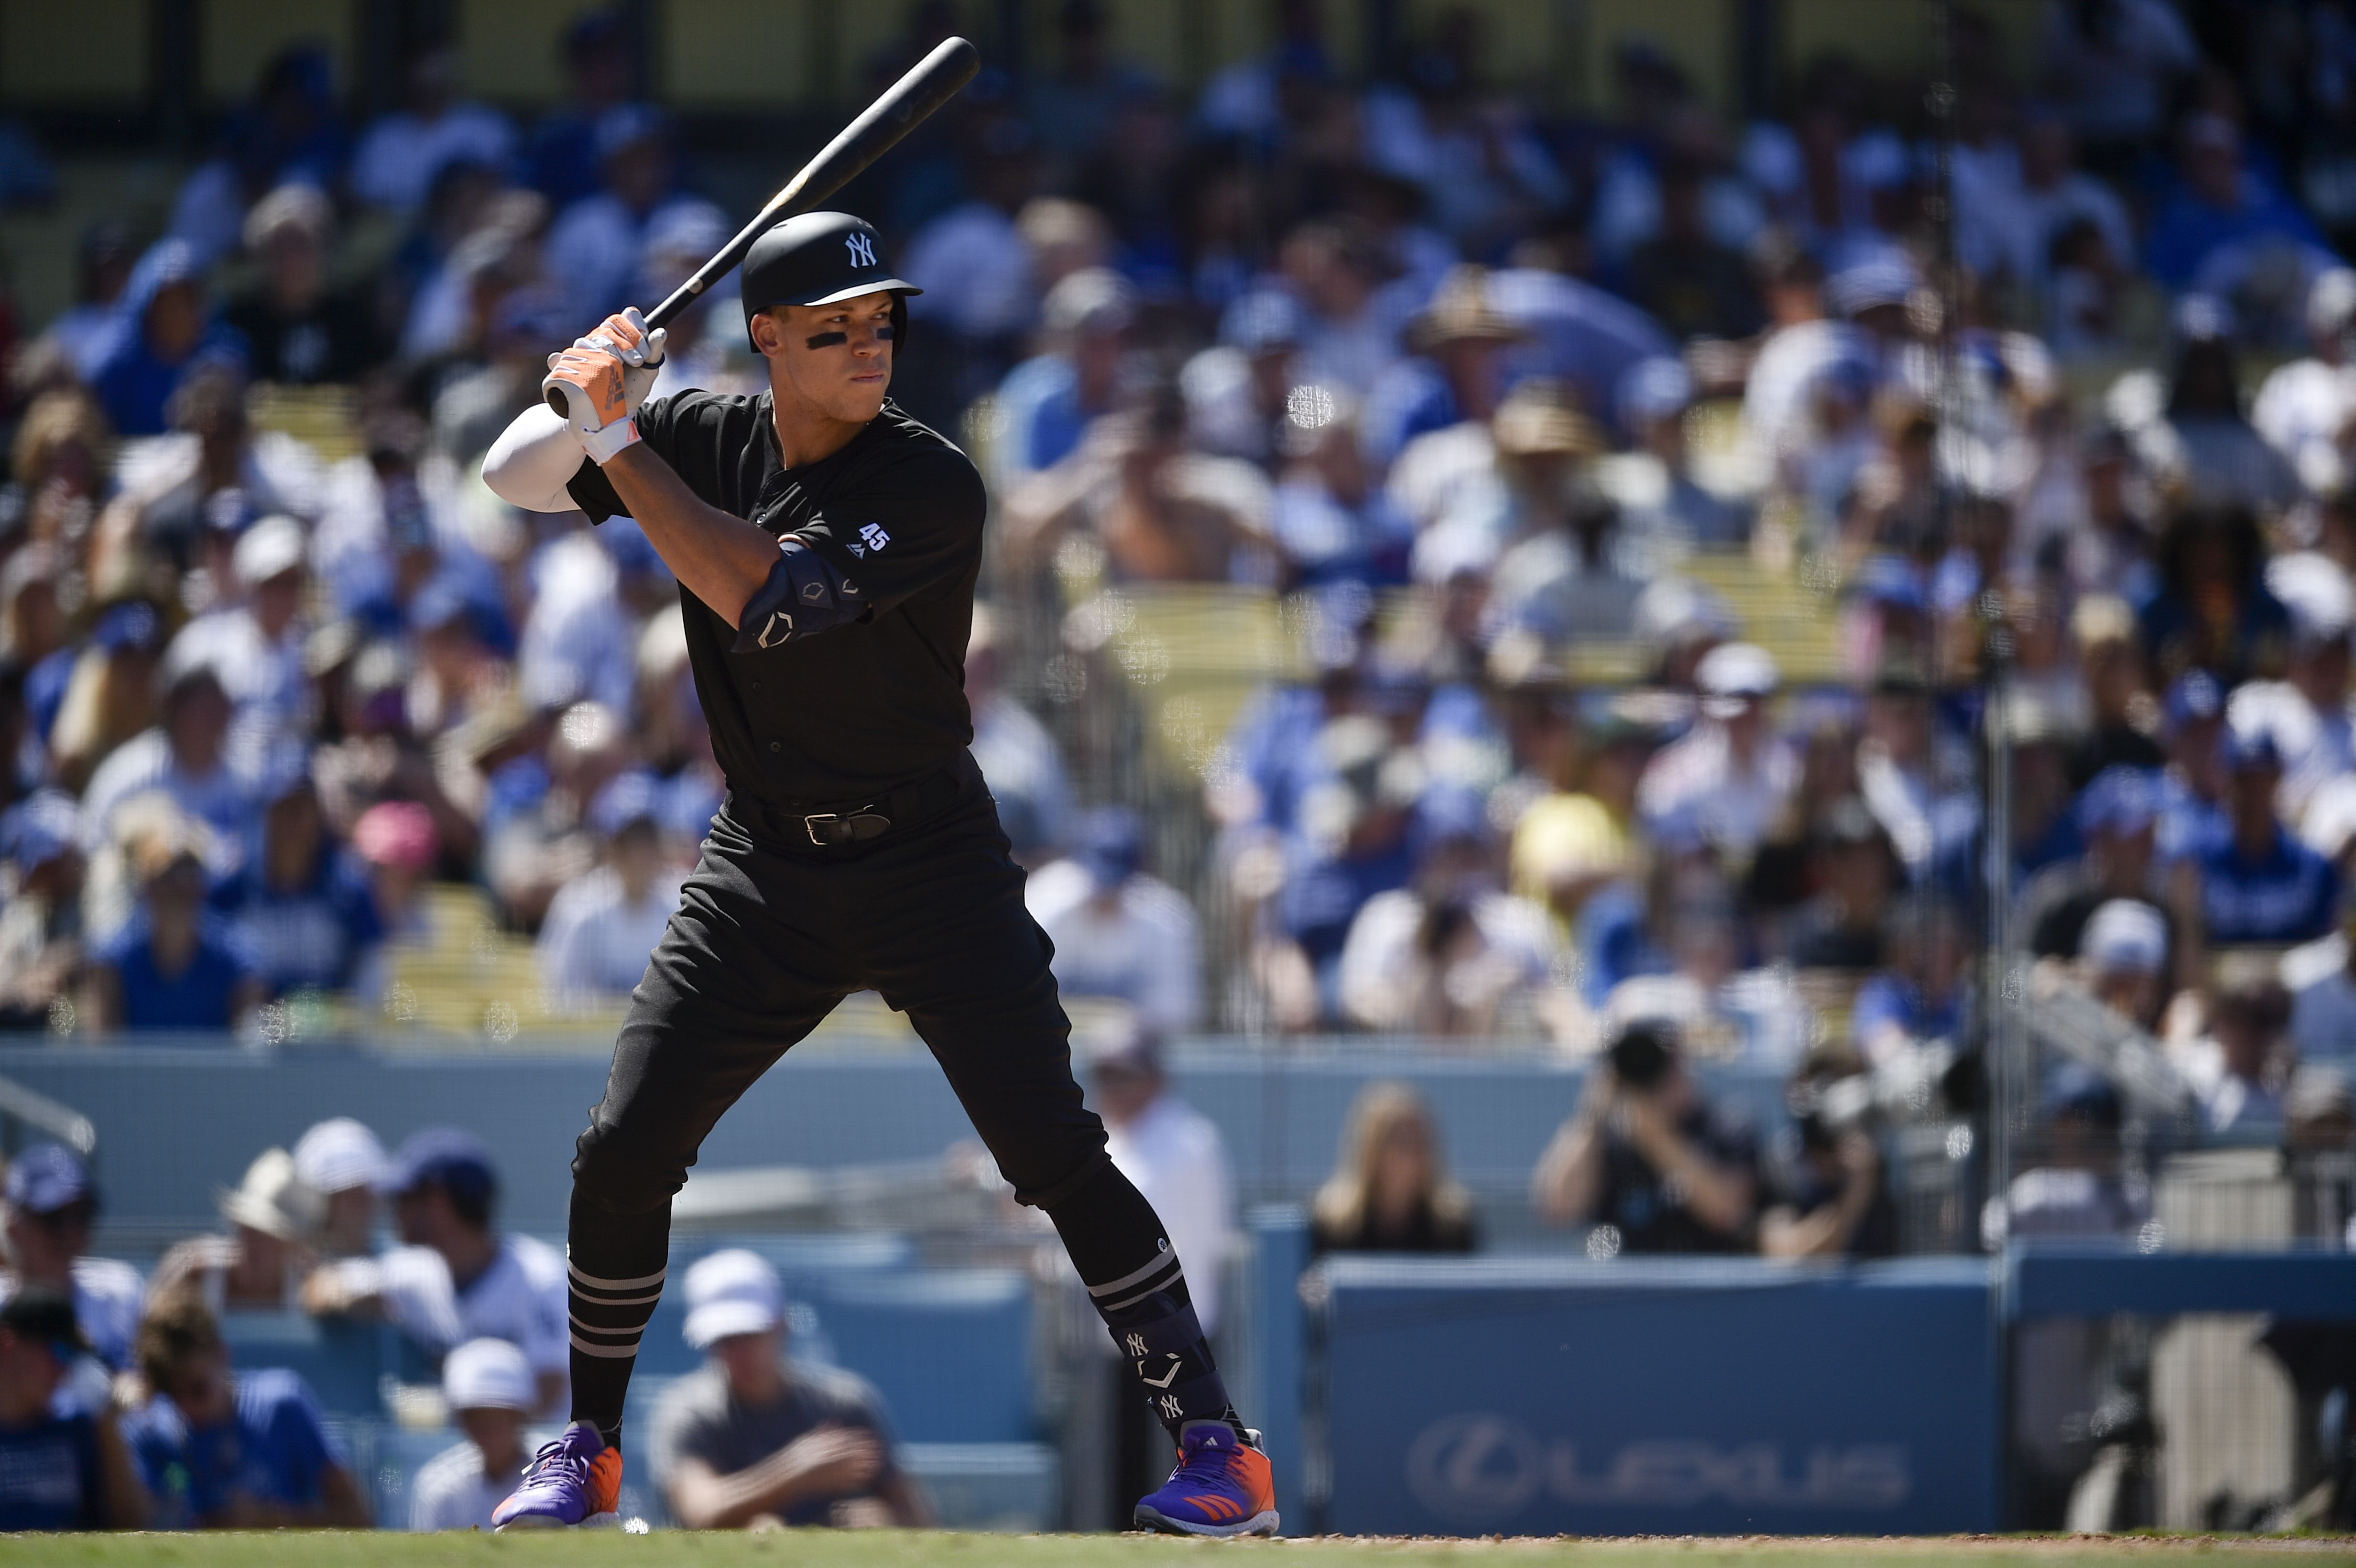 LOS ANGELES, CA - AUGUST 25: xxx during a MLB game between the New York  Yankees and the Los Angeles Dodgers on August 25, 2019 at Dodger Stadium in  Los Angeles, CA. (